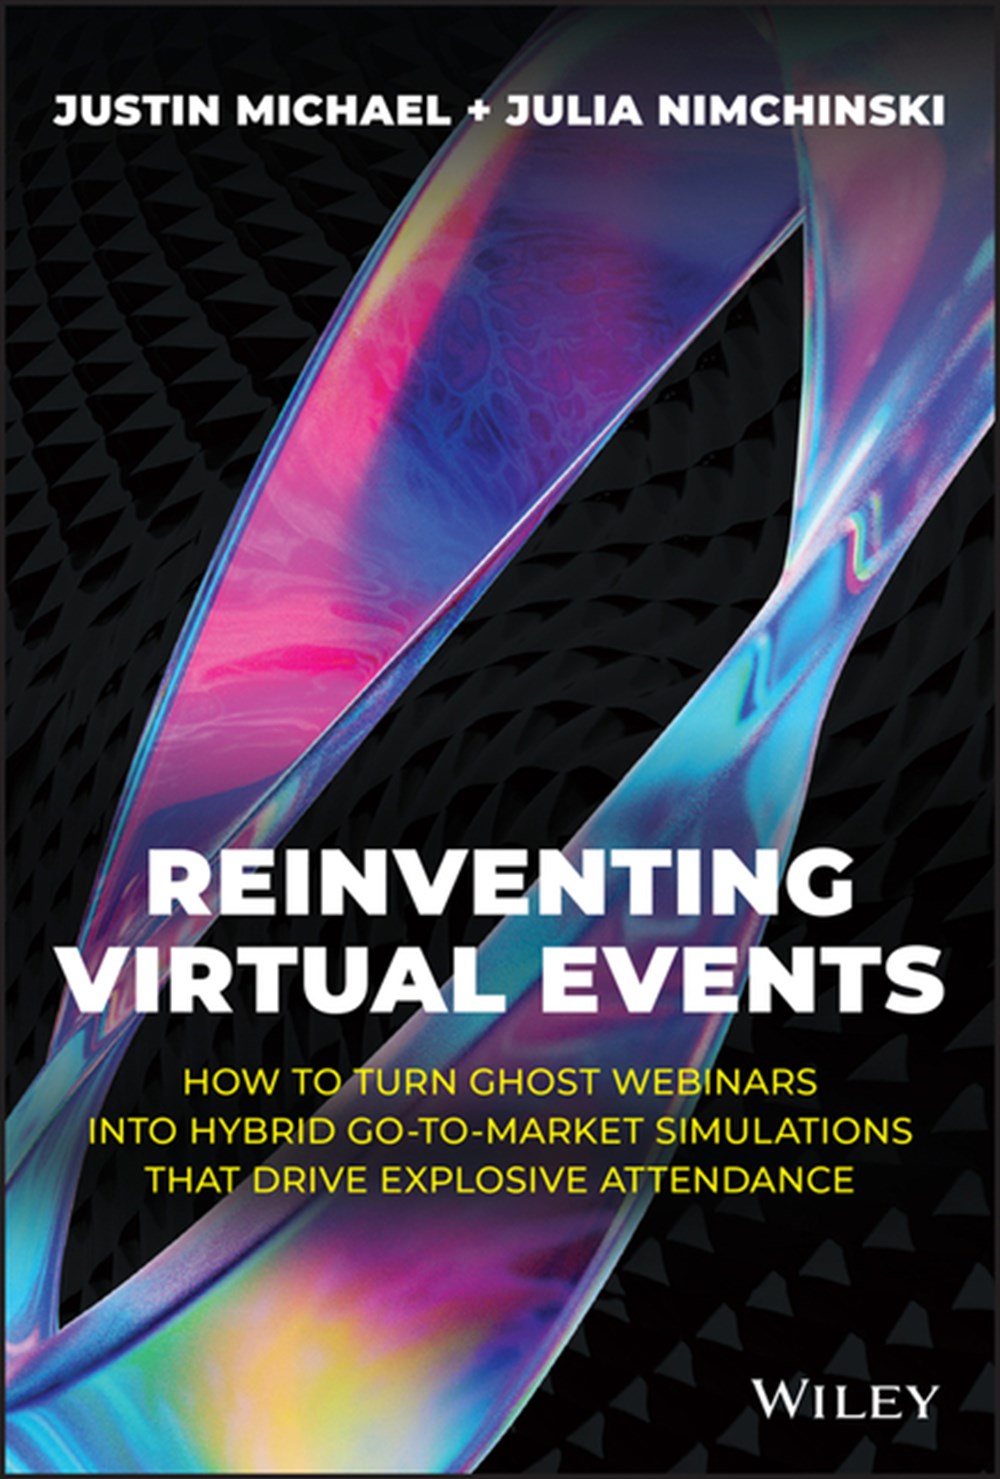 Reinventing Virtual Events: How to Turn Ghost Webinars Into Hybrid Go-To-Market Simulations That Dri